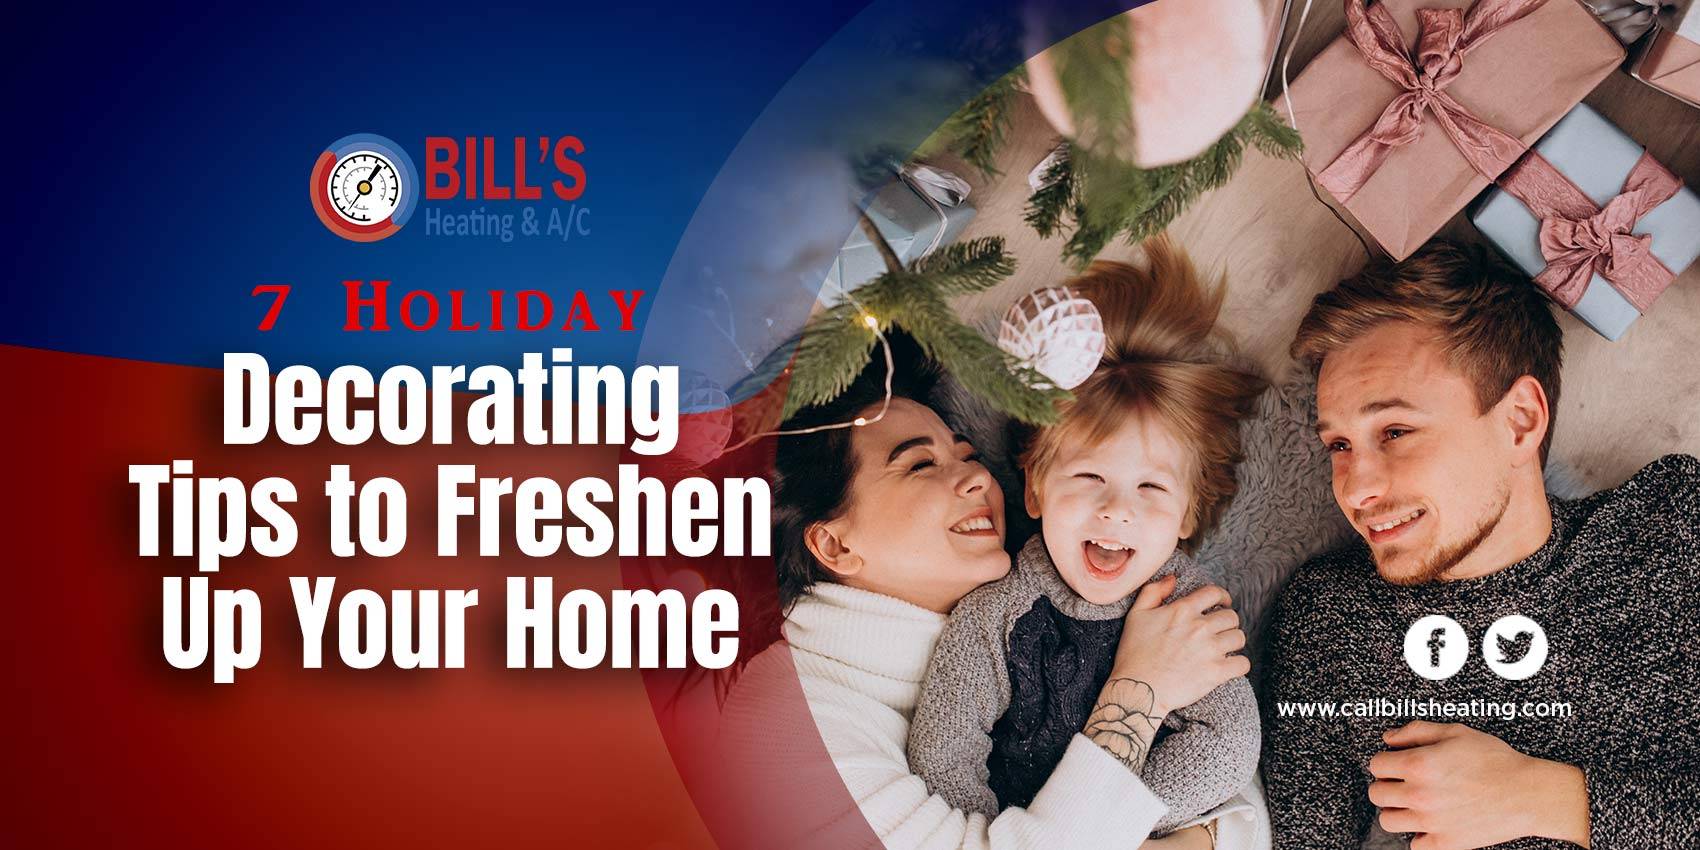 7 Holiday Decorating Tips to Freshen Up Your Home